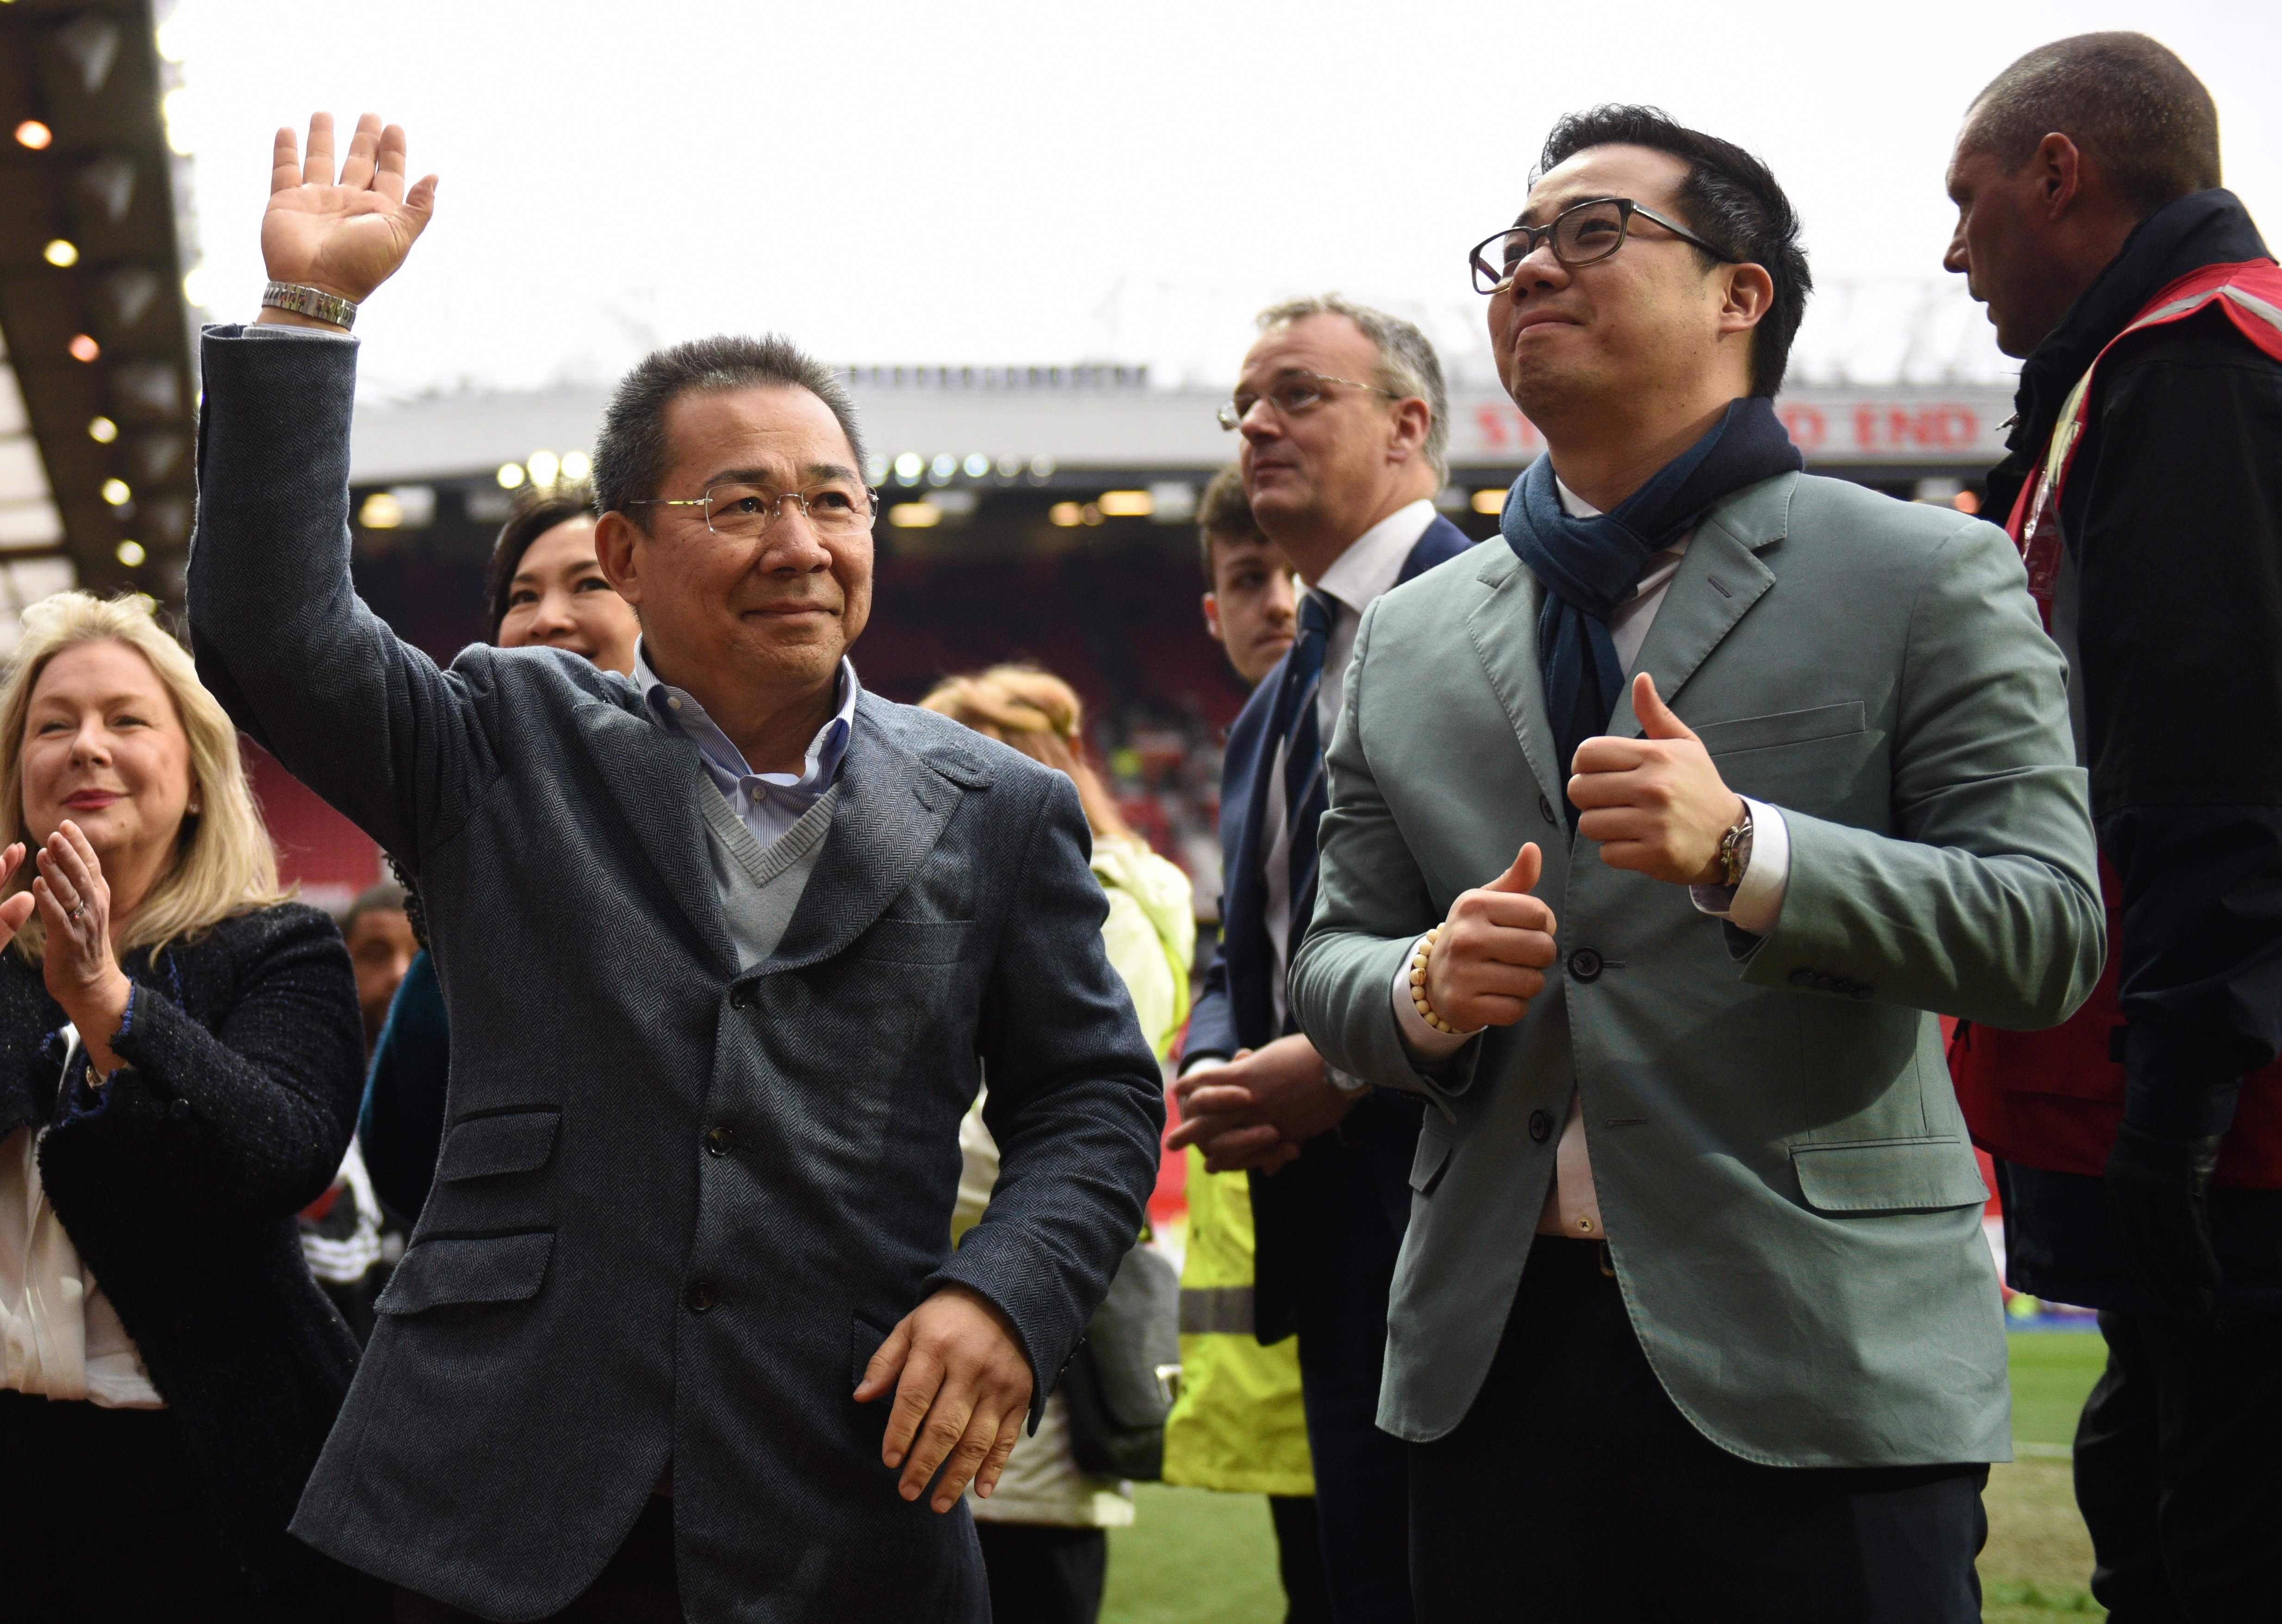 Leicester City's Thai chairman Vichai Srivaddhanaprabha (L) waves to fans next to son Aiyawatt Srivaddhanaprabha (R) after the English Premier League match against Manchester United in May, 2016. Photo: AFP